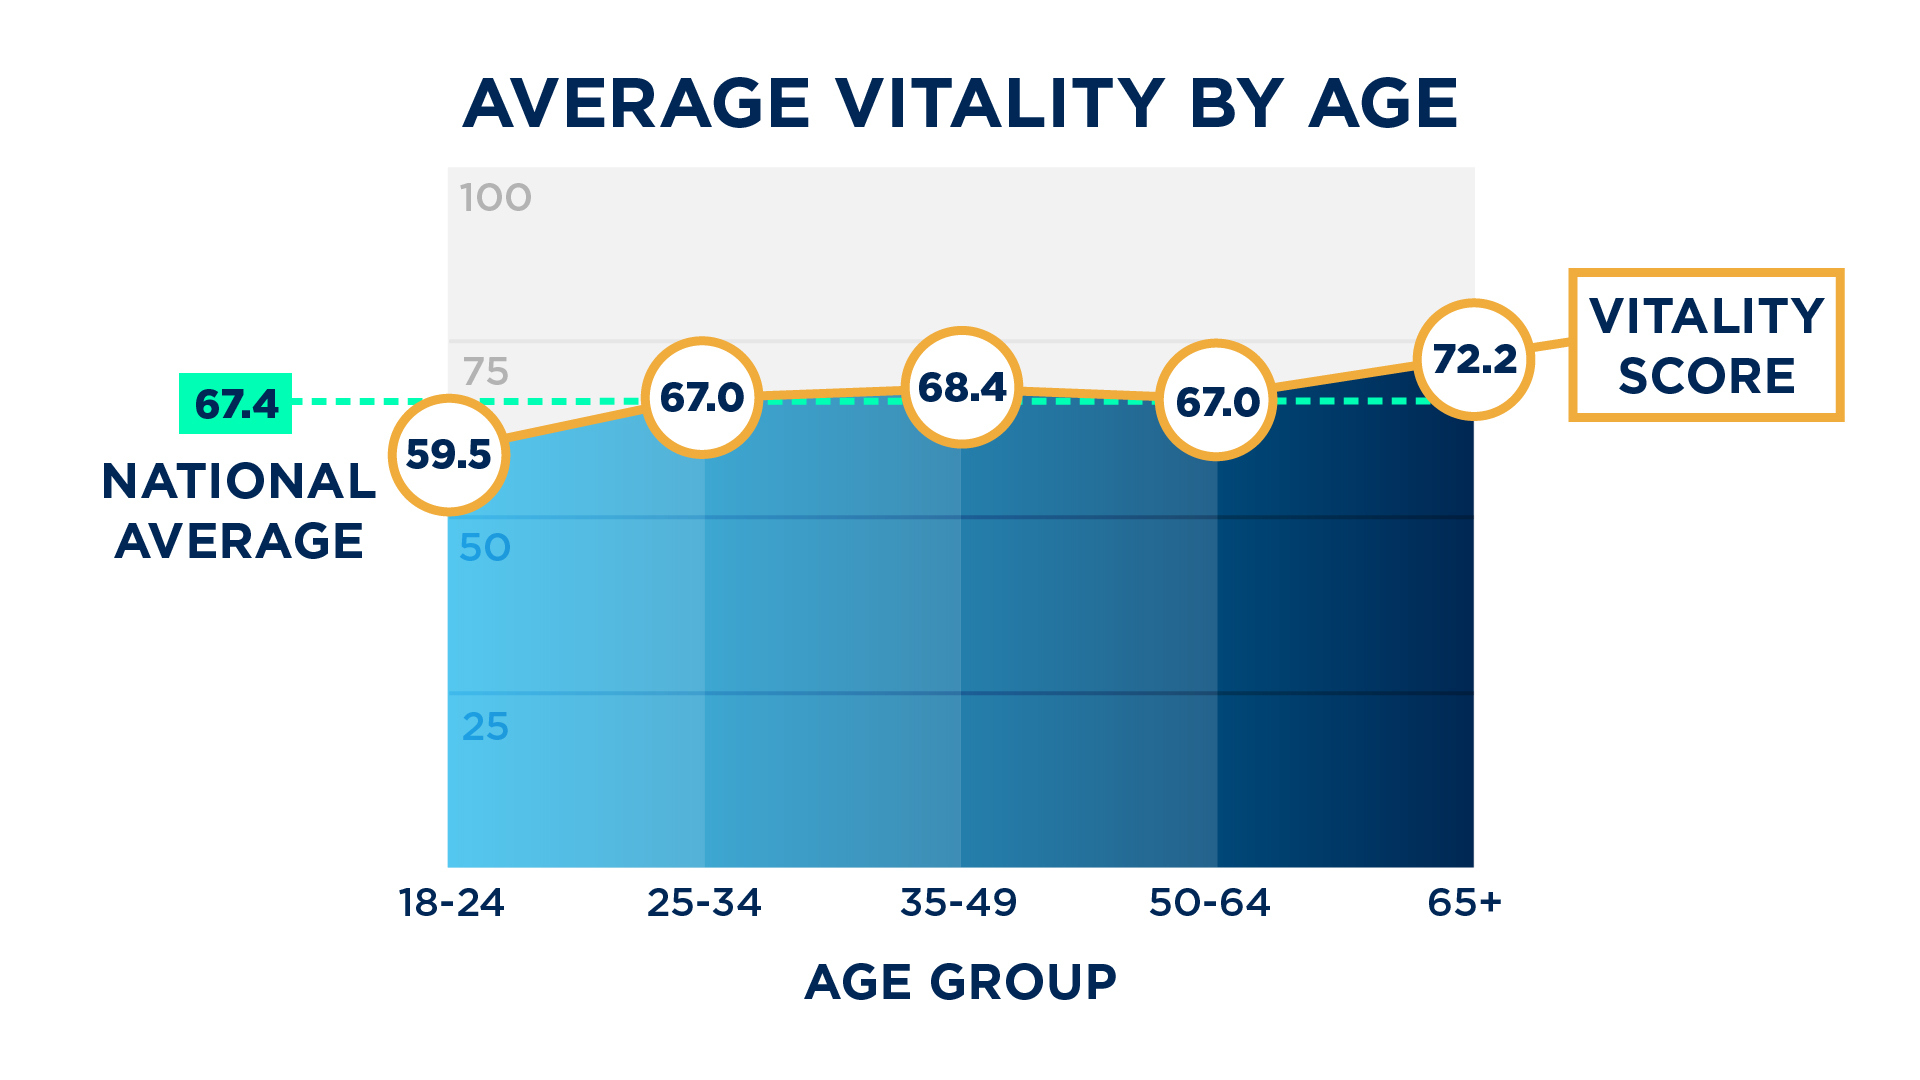 Average vitality by age